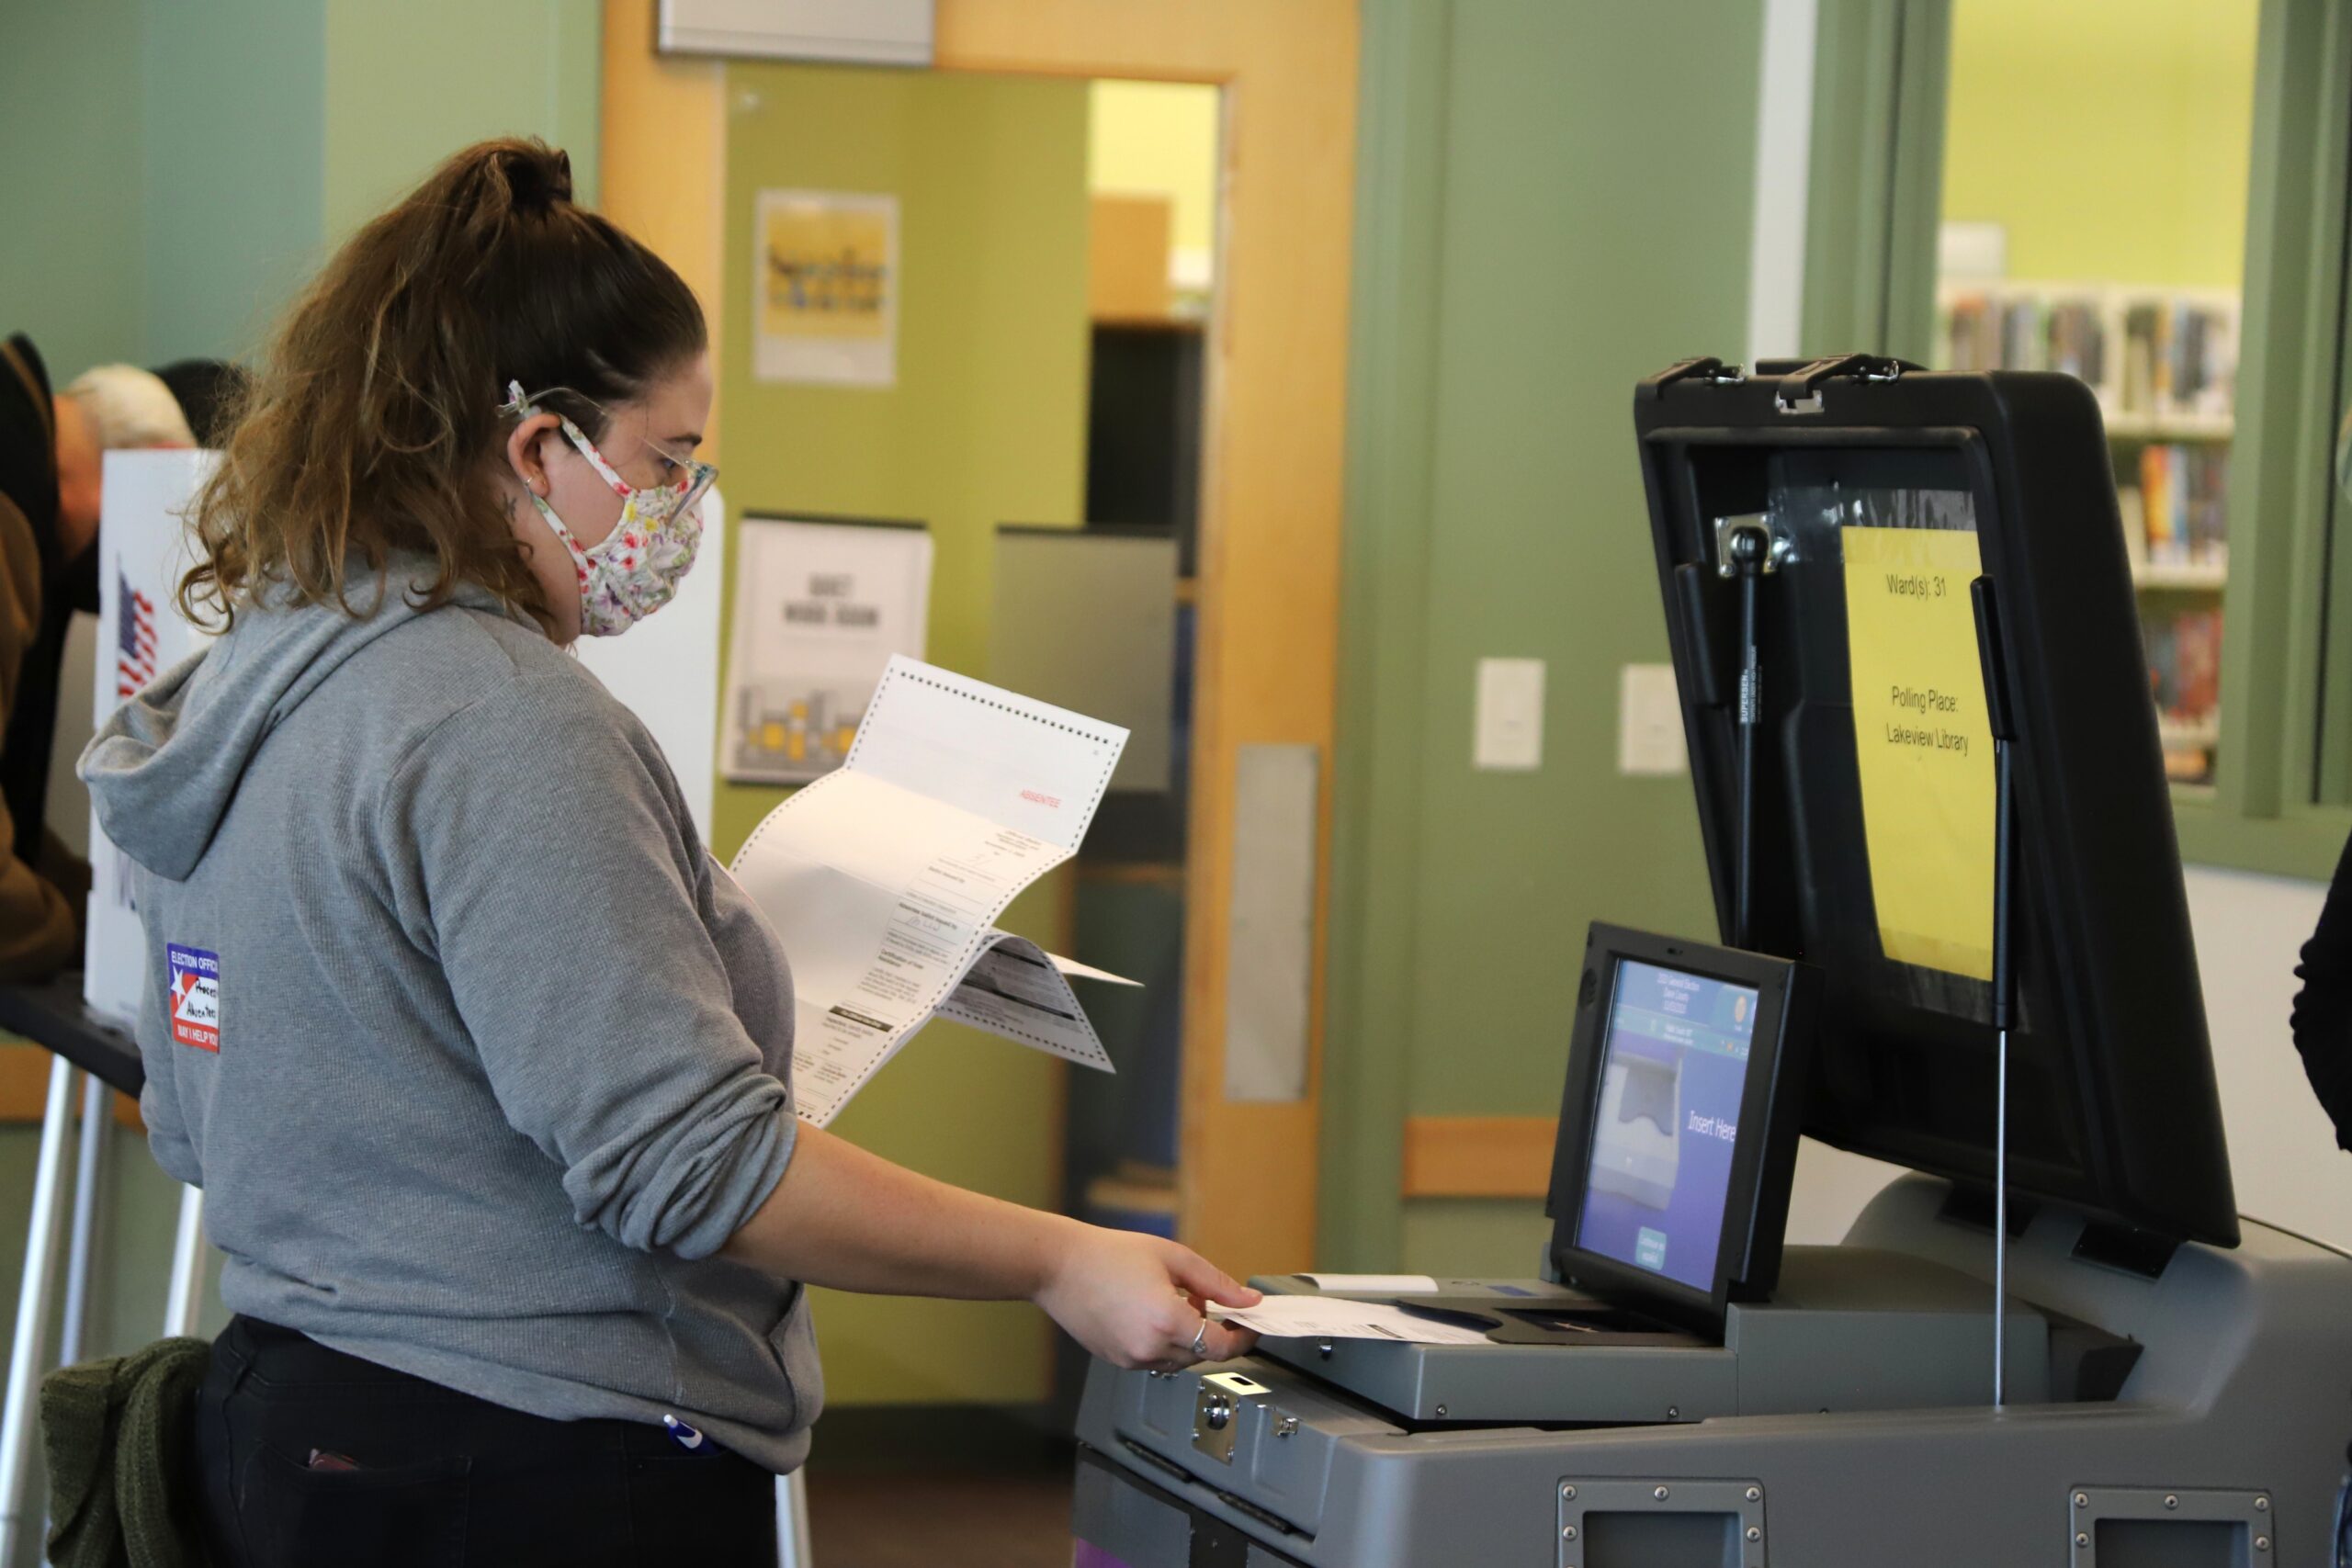 A poll worker inserting absentee ballots into a voting machine at the Lakeview Library on Madison's north side